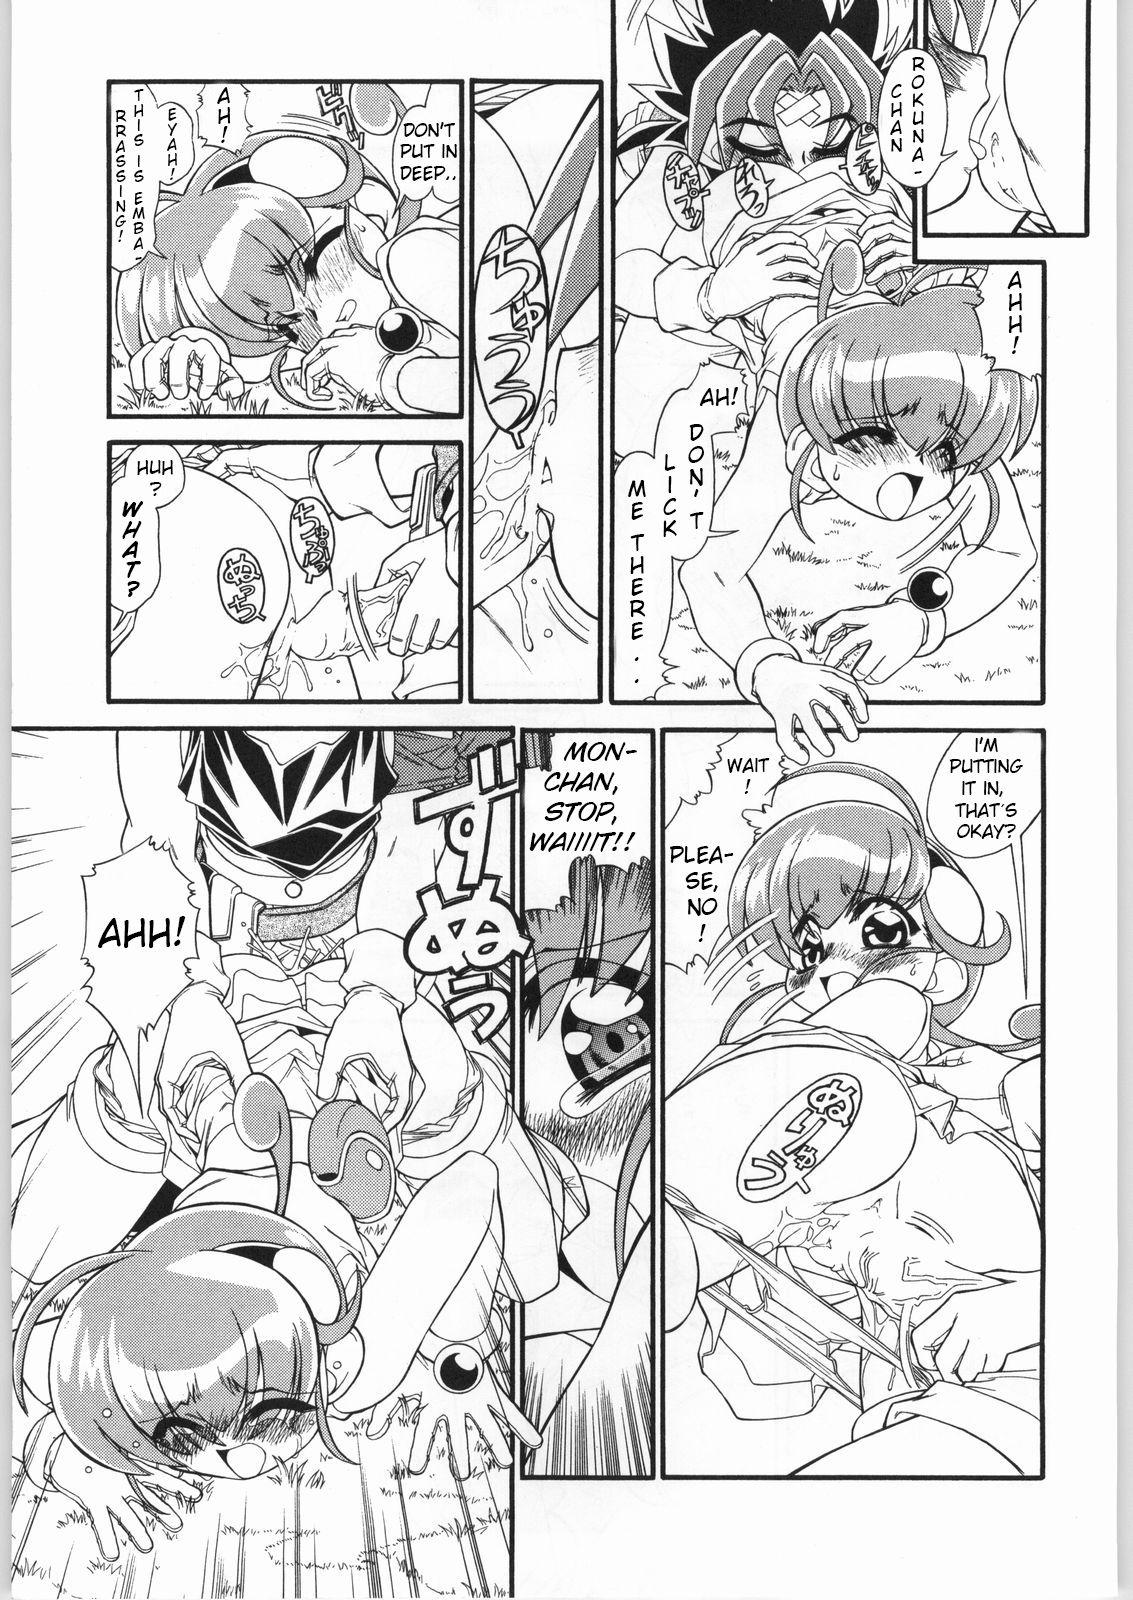 Gay Cock M.F.H.H.MN REVISE - Mon colle knights Sentones - Page 4